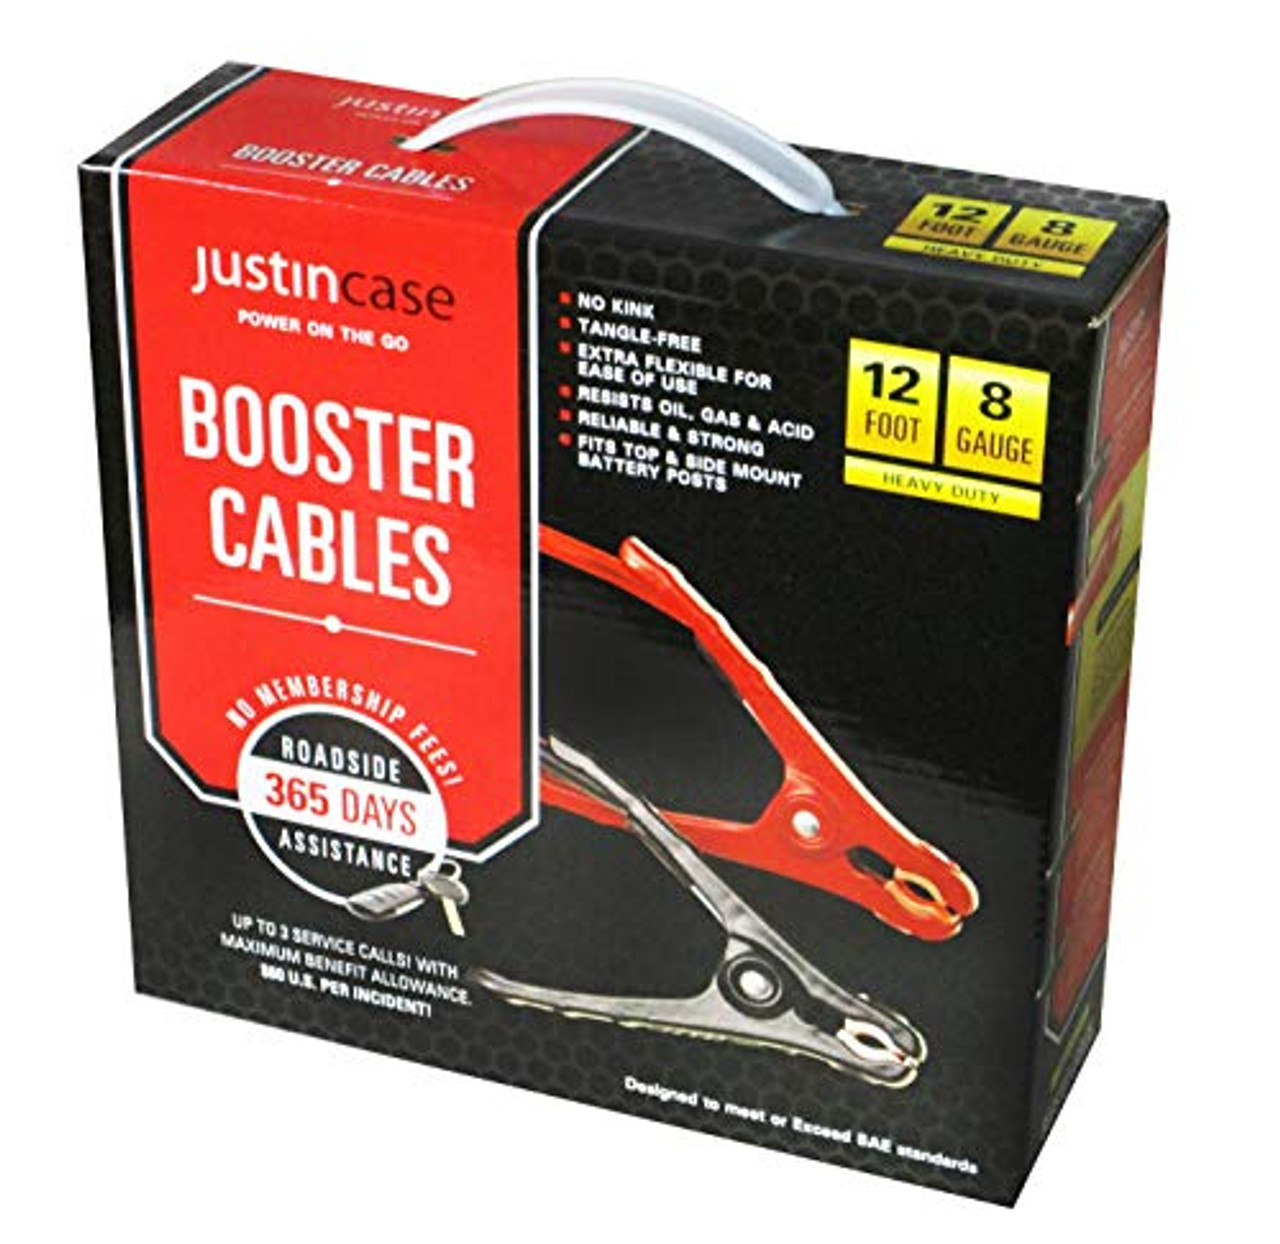 Justin Case JCBC1208 12 Foot 8 Gauge Heavy Duty Booster Cables